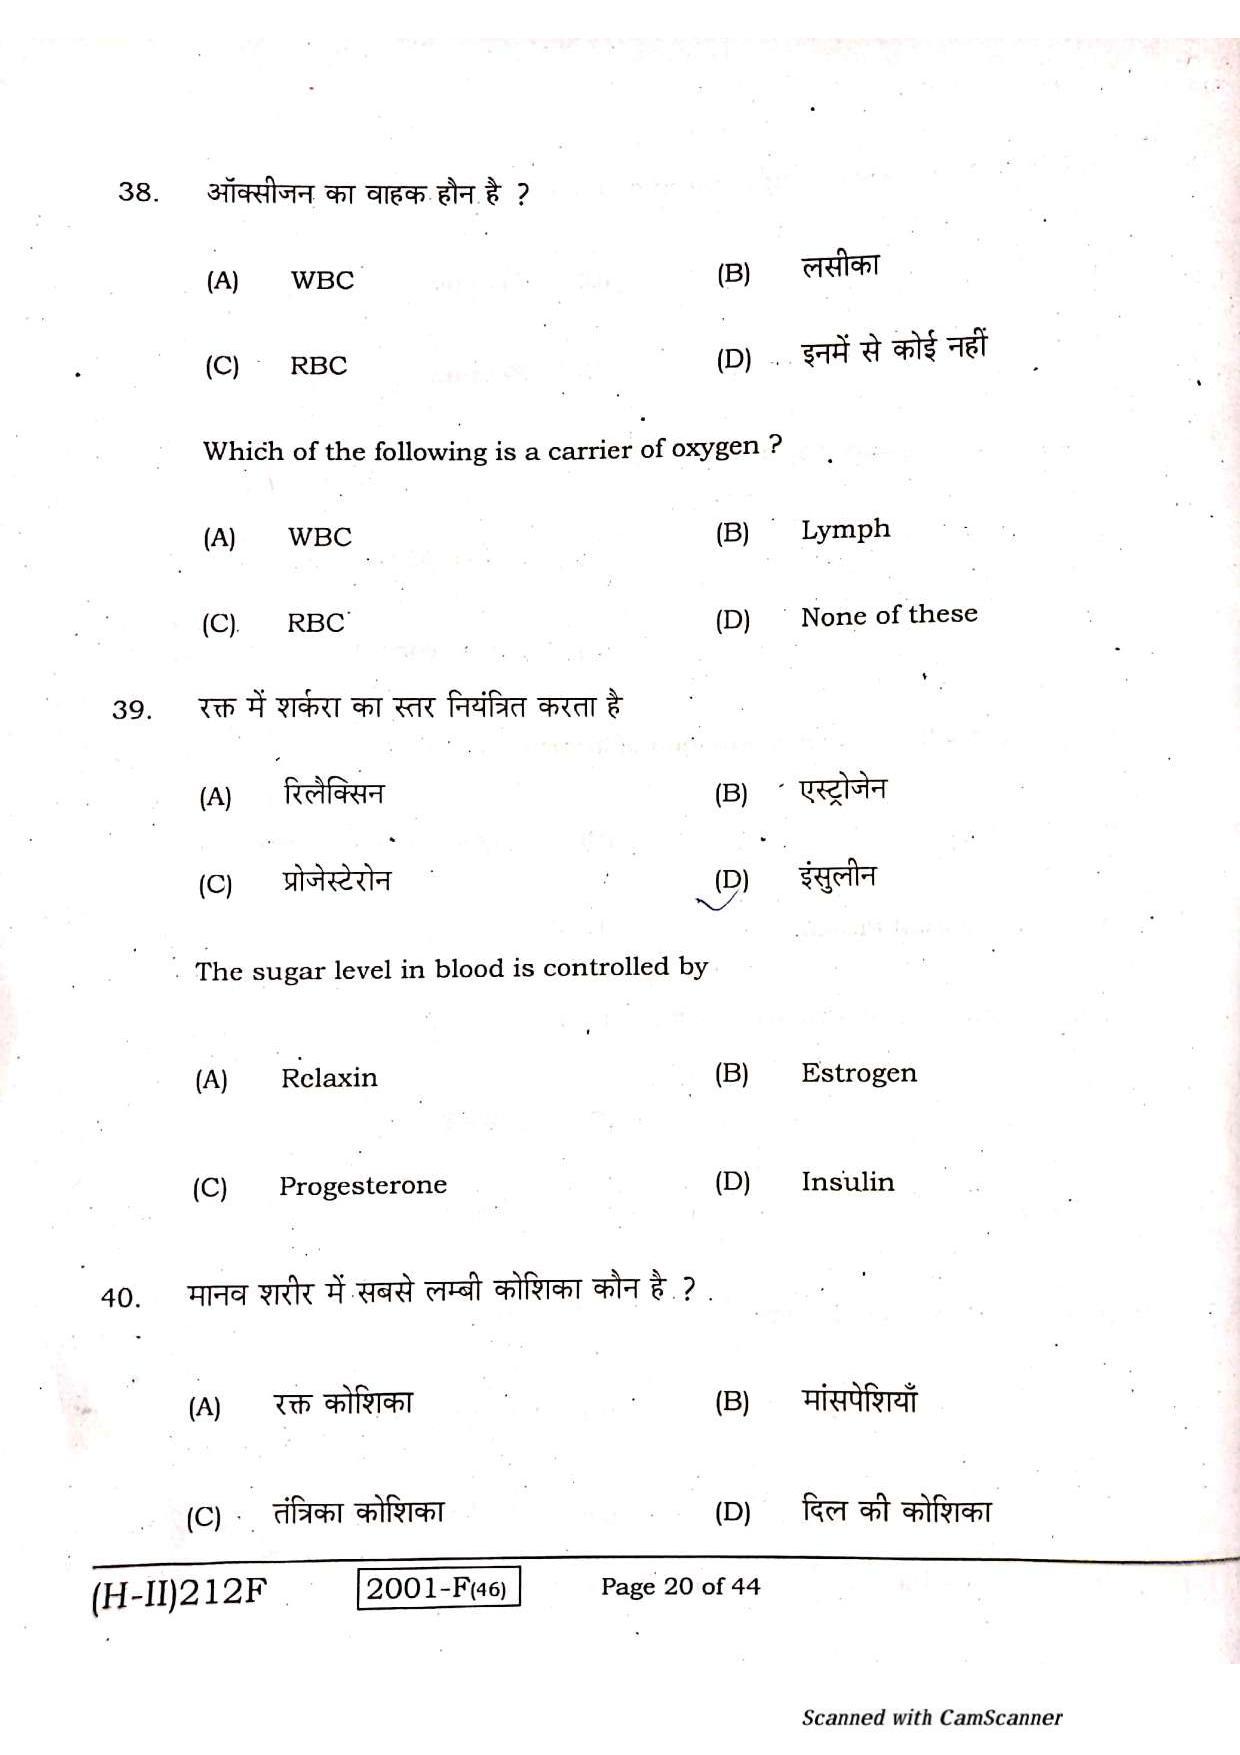 Bihar Board Class 10 Science 2021 (2nd Sitting) Question Paper - Page 18